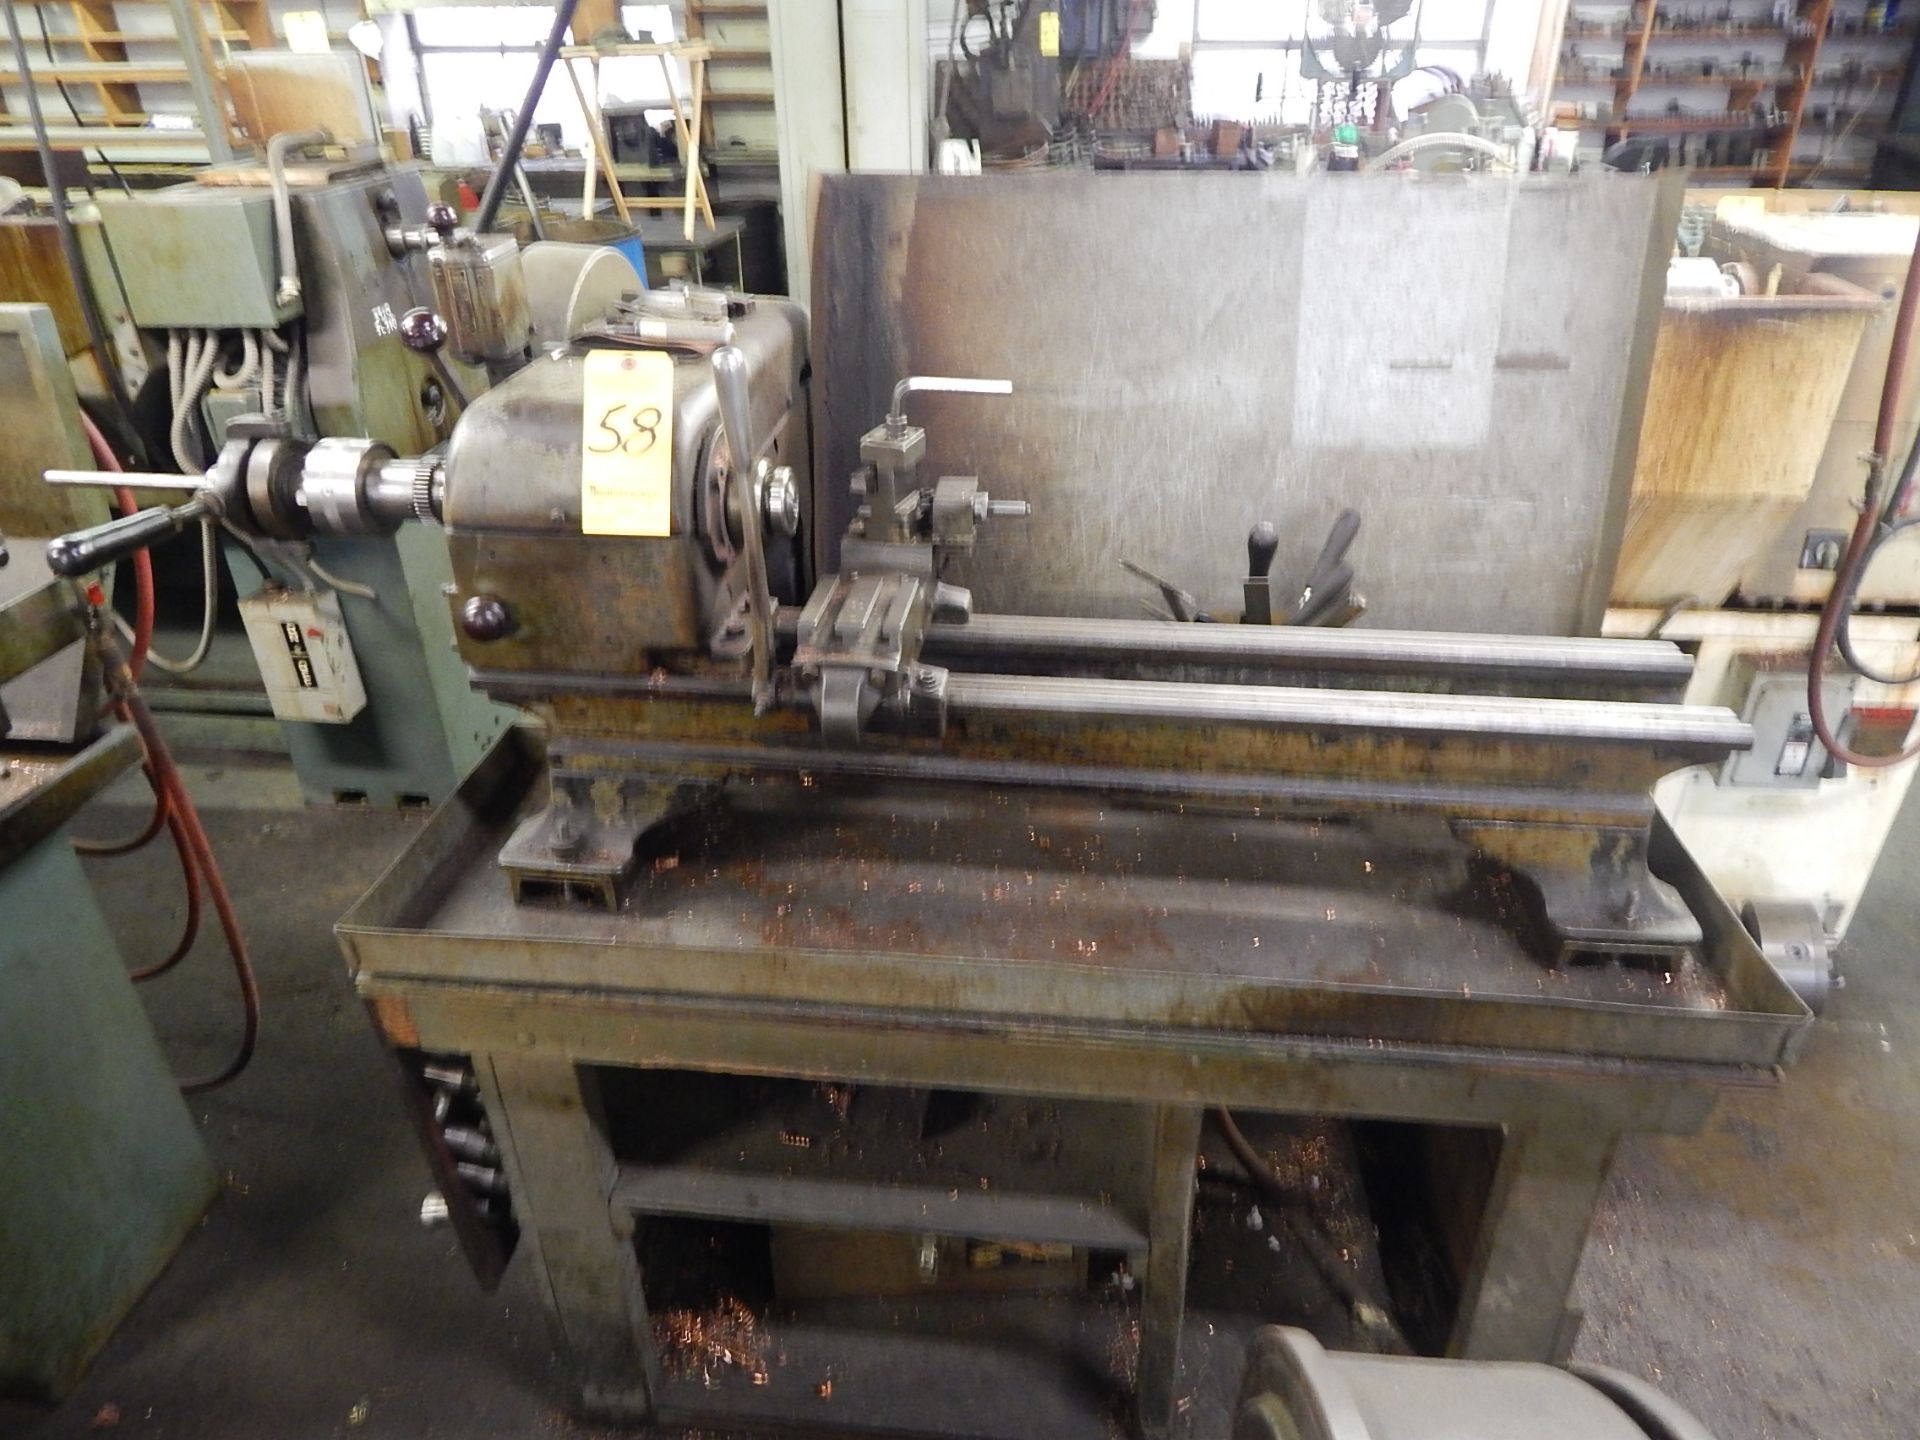 Sheldon 12" Bench Lathe, 5C Collet Closer, No Tailstock, Loading Fee $100.00 - Image 2 of 3